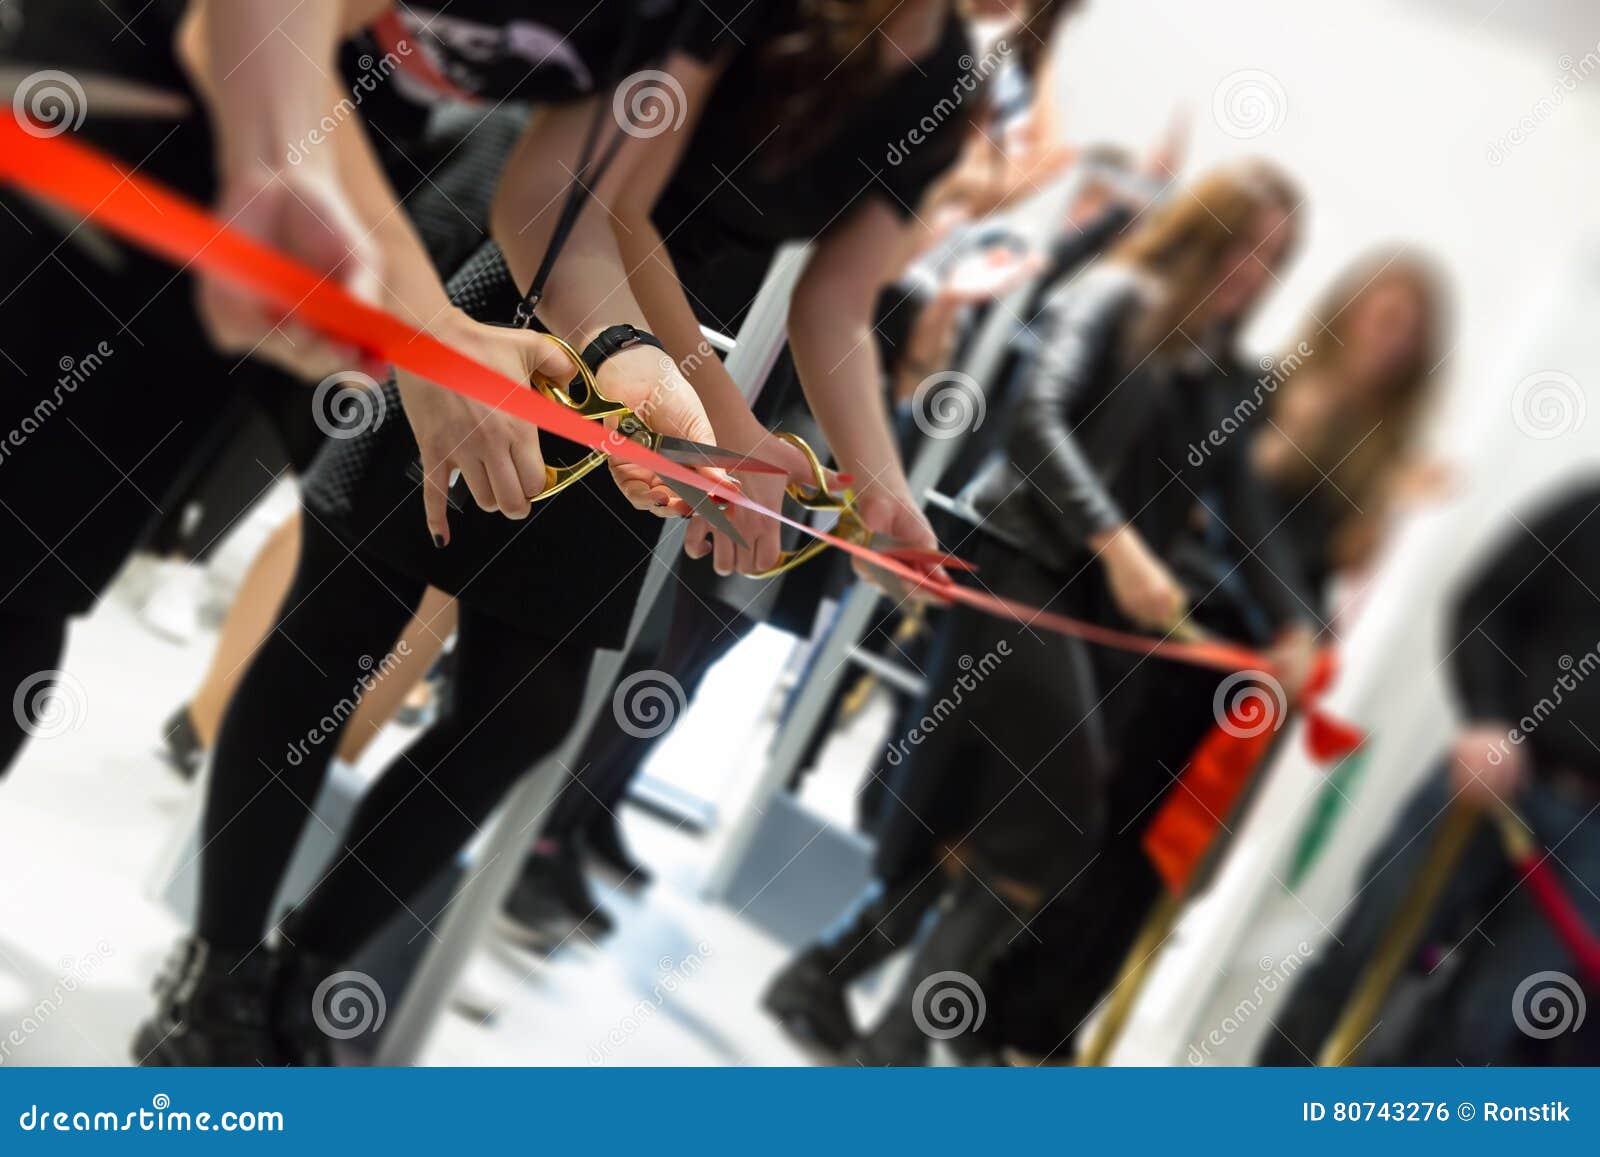 store grand opening - cutting red ribbon